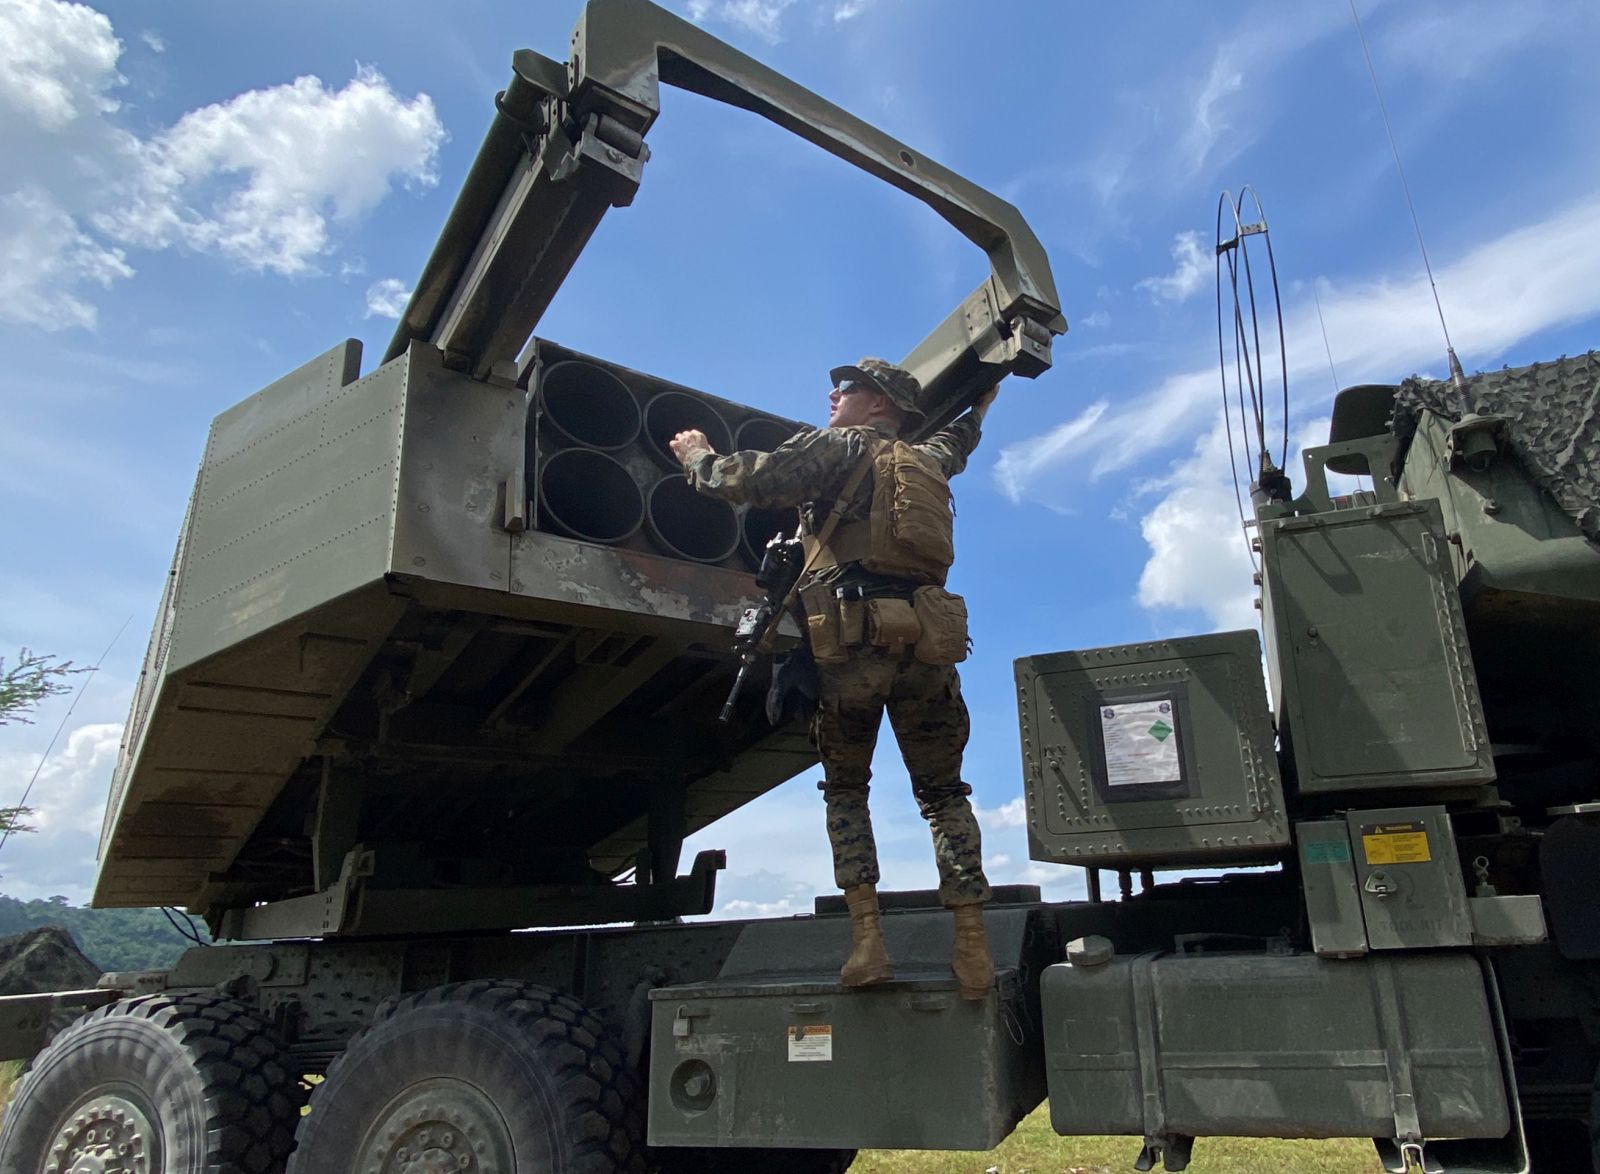 epa10240080 A US Marine works on a light multiple rocket launcher M142 High Mobility Artillery Rocket System (HIMARS) during a military exercise in Capas, Tarlac province, Philippines, 13 October 2022. The Philippines hosted simultaneous combat drills with the United States, South Korea, and Japan to improve interoperability in times of conflict.  EPA/FRANCIS R. MALASIG